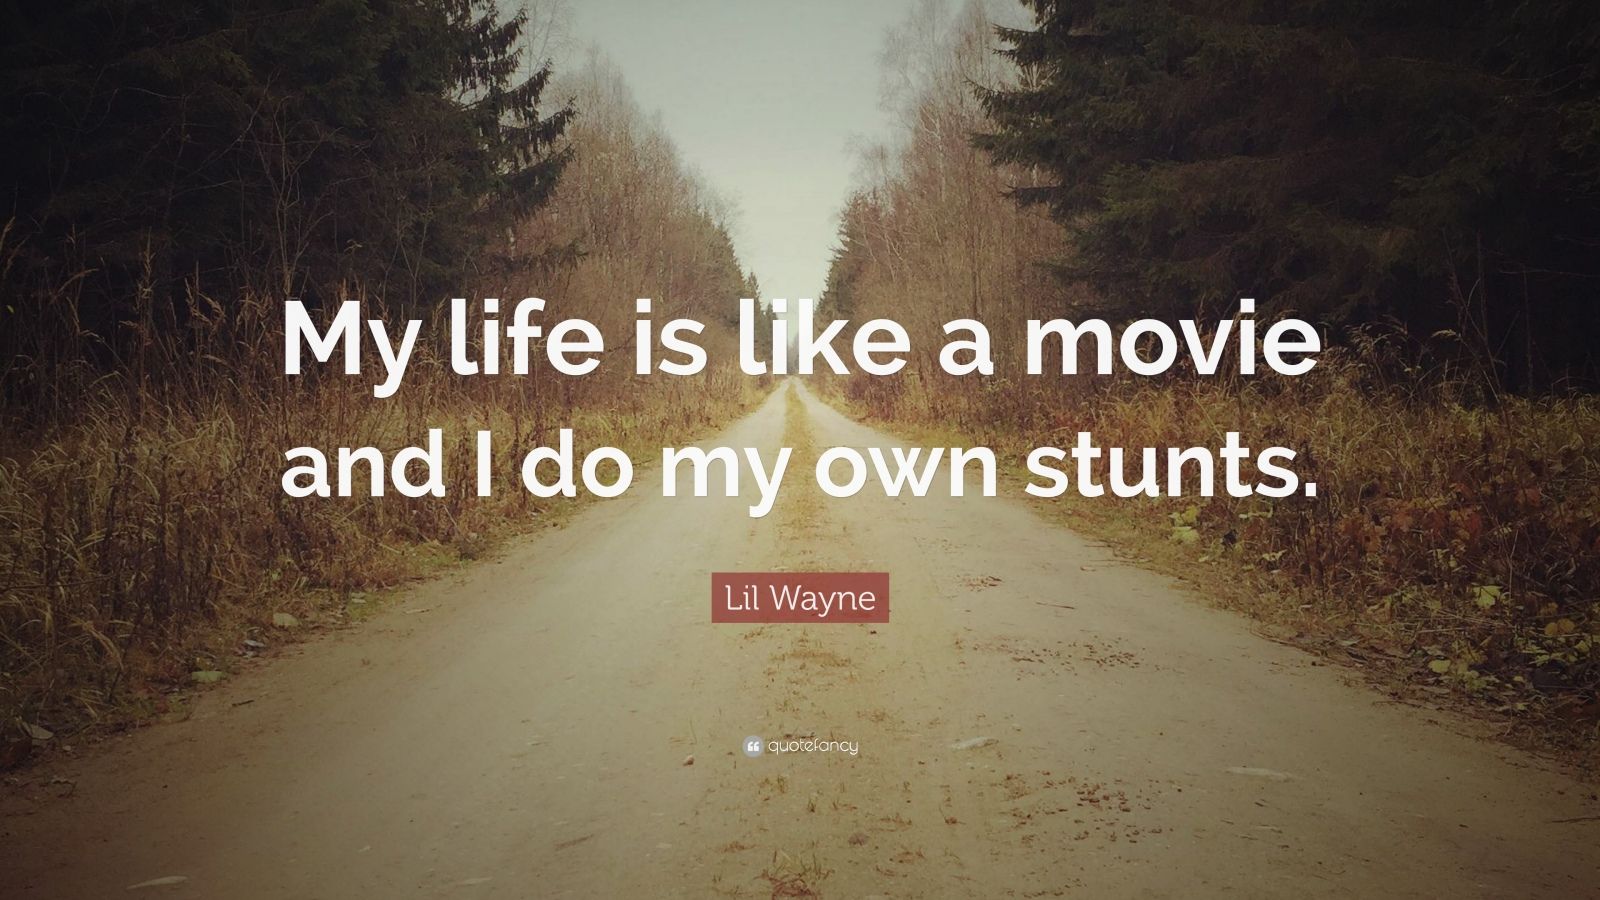 lil-wayne-quote-my-life-is-like-a-movie-and-i-do-my-own-stunts